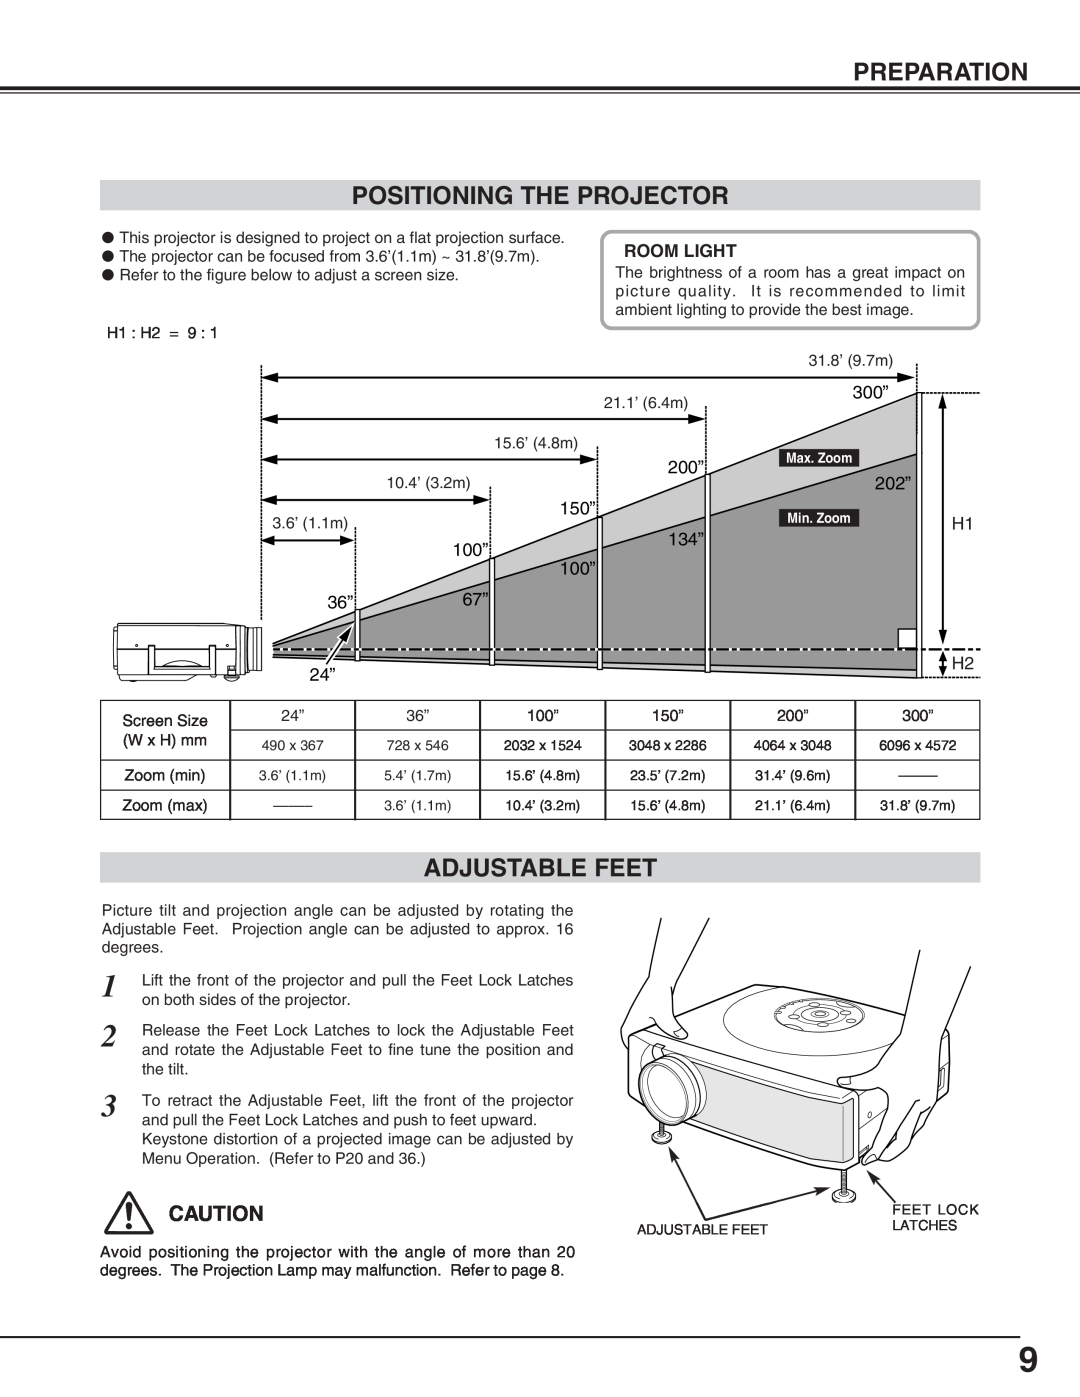 Canon LV-5200 owner manual Preparation Positioning The Projector, Adjustable Feet, Room Light 